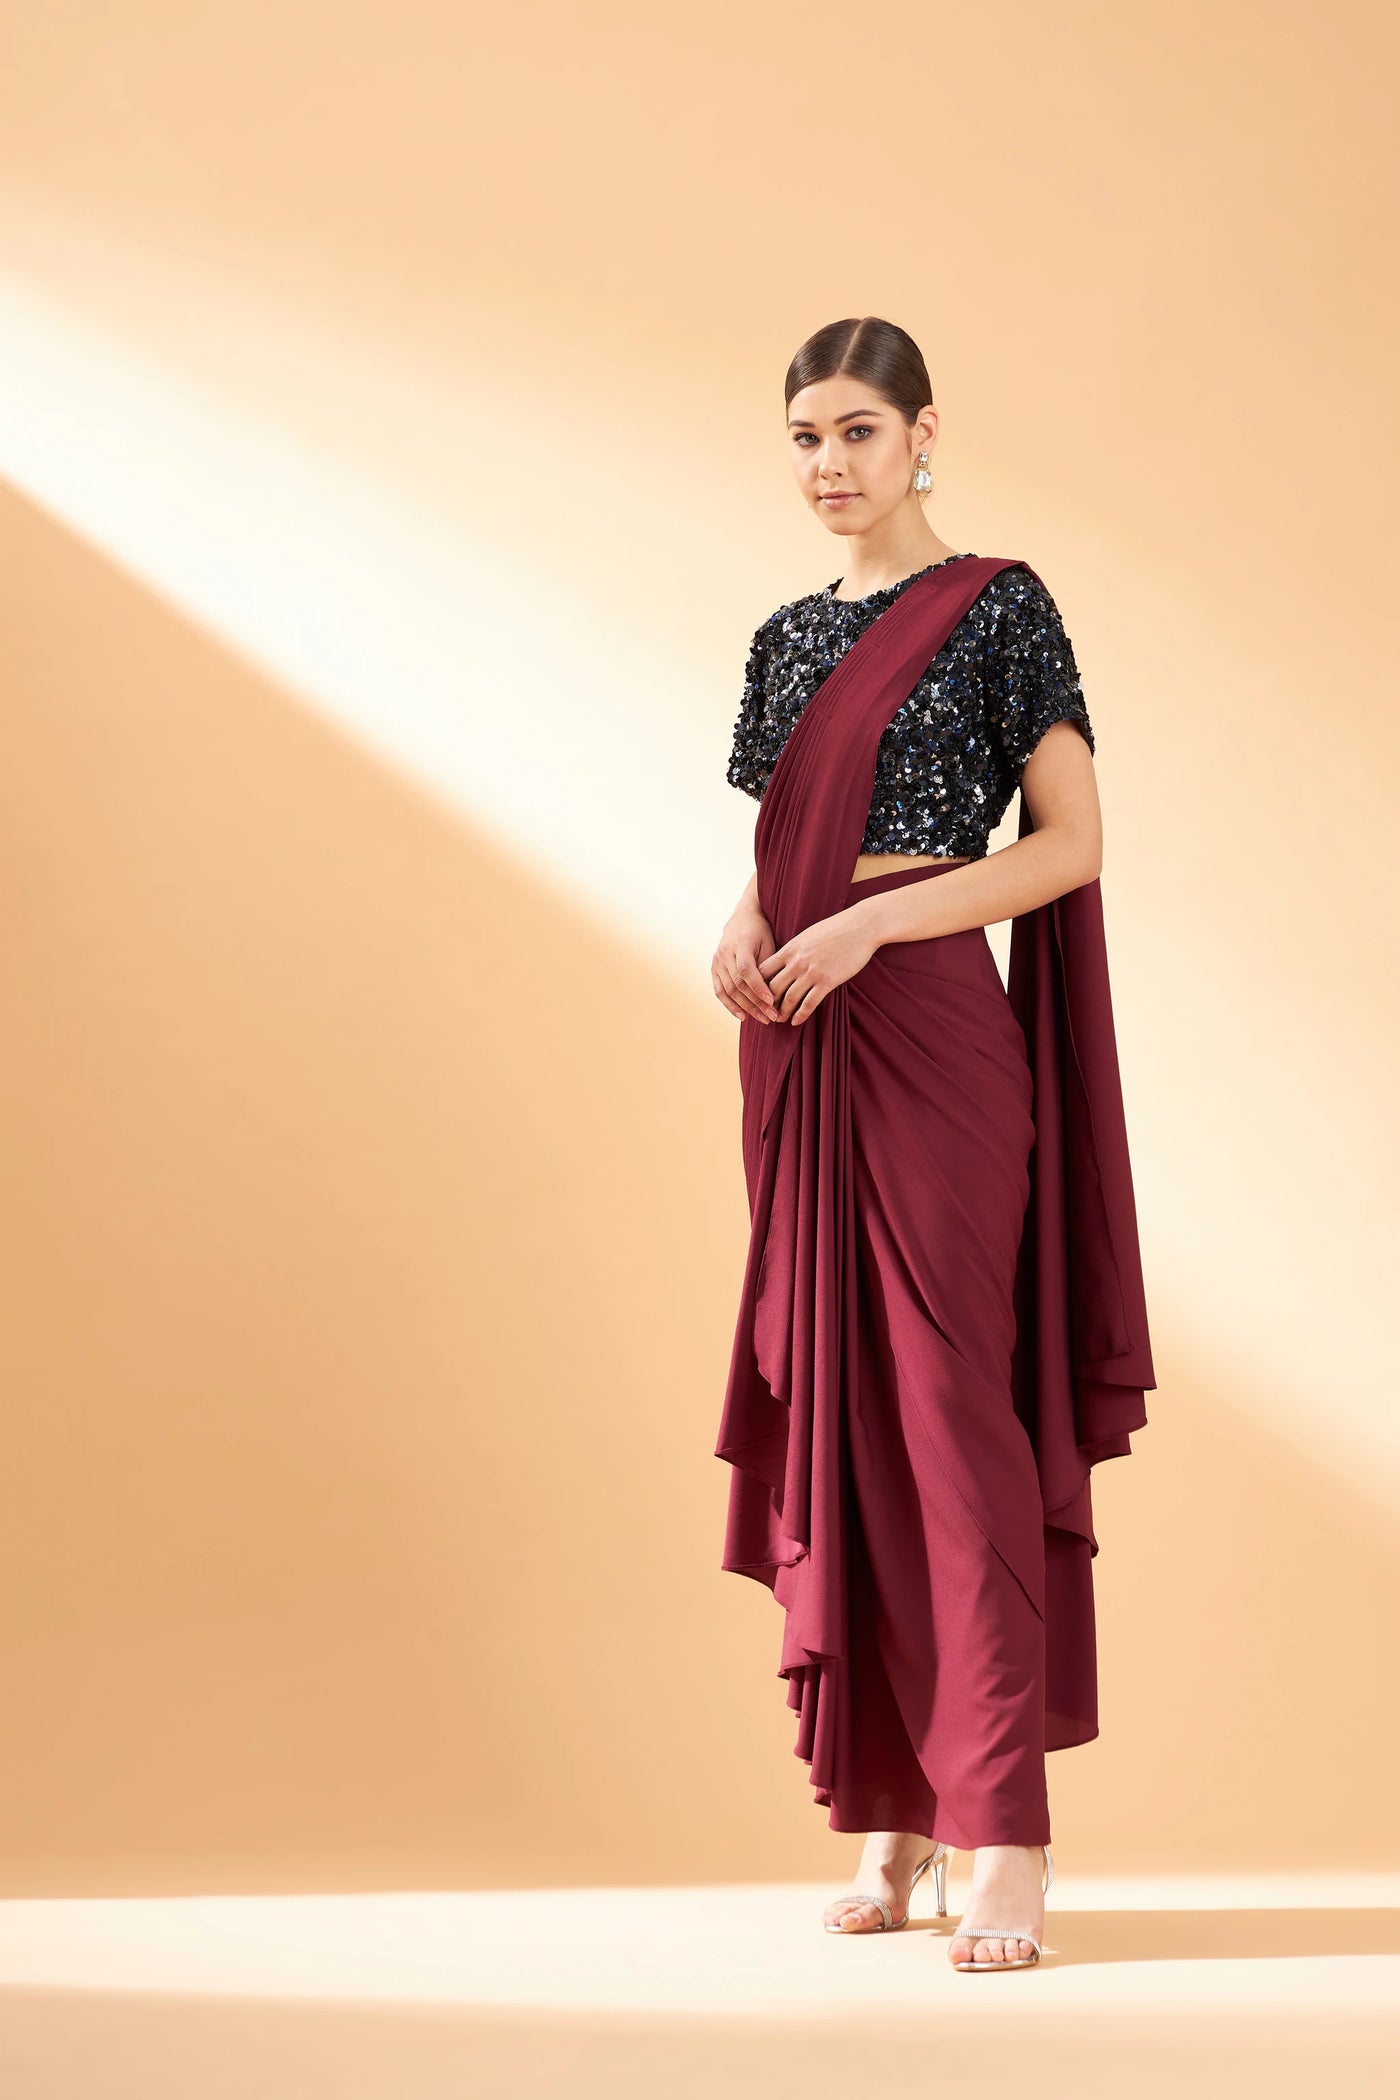 Maroon Crystal Draped Saree Indian Clothing in Denver, CO, Aurora, CO, Boulder, CO, Fort Collins, CO, Colorado Springs, CO, Parker, CO, Highlands Ranch, CO, Cherry Creek, CO, Centennial, CO, and Longmont, CO. NATIONWIDE SHIPPING USA- India Fashion X